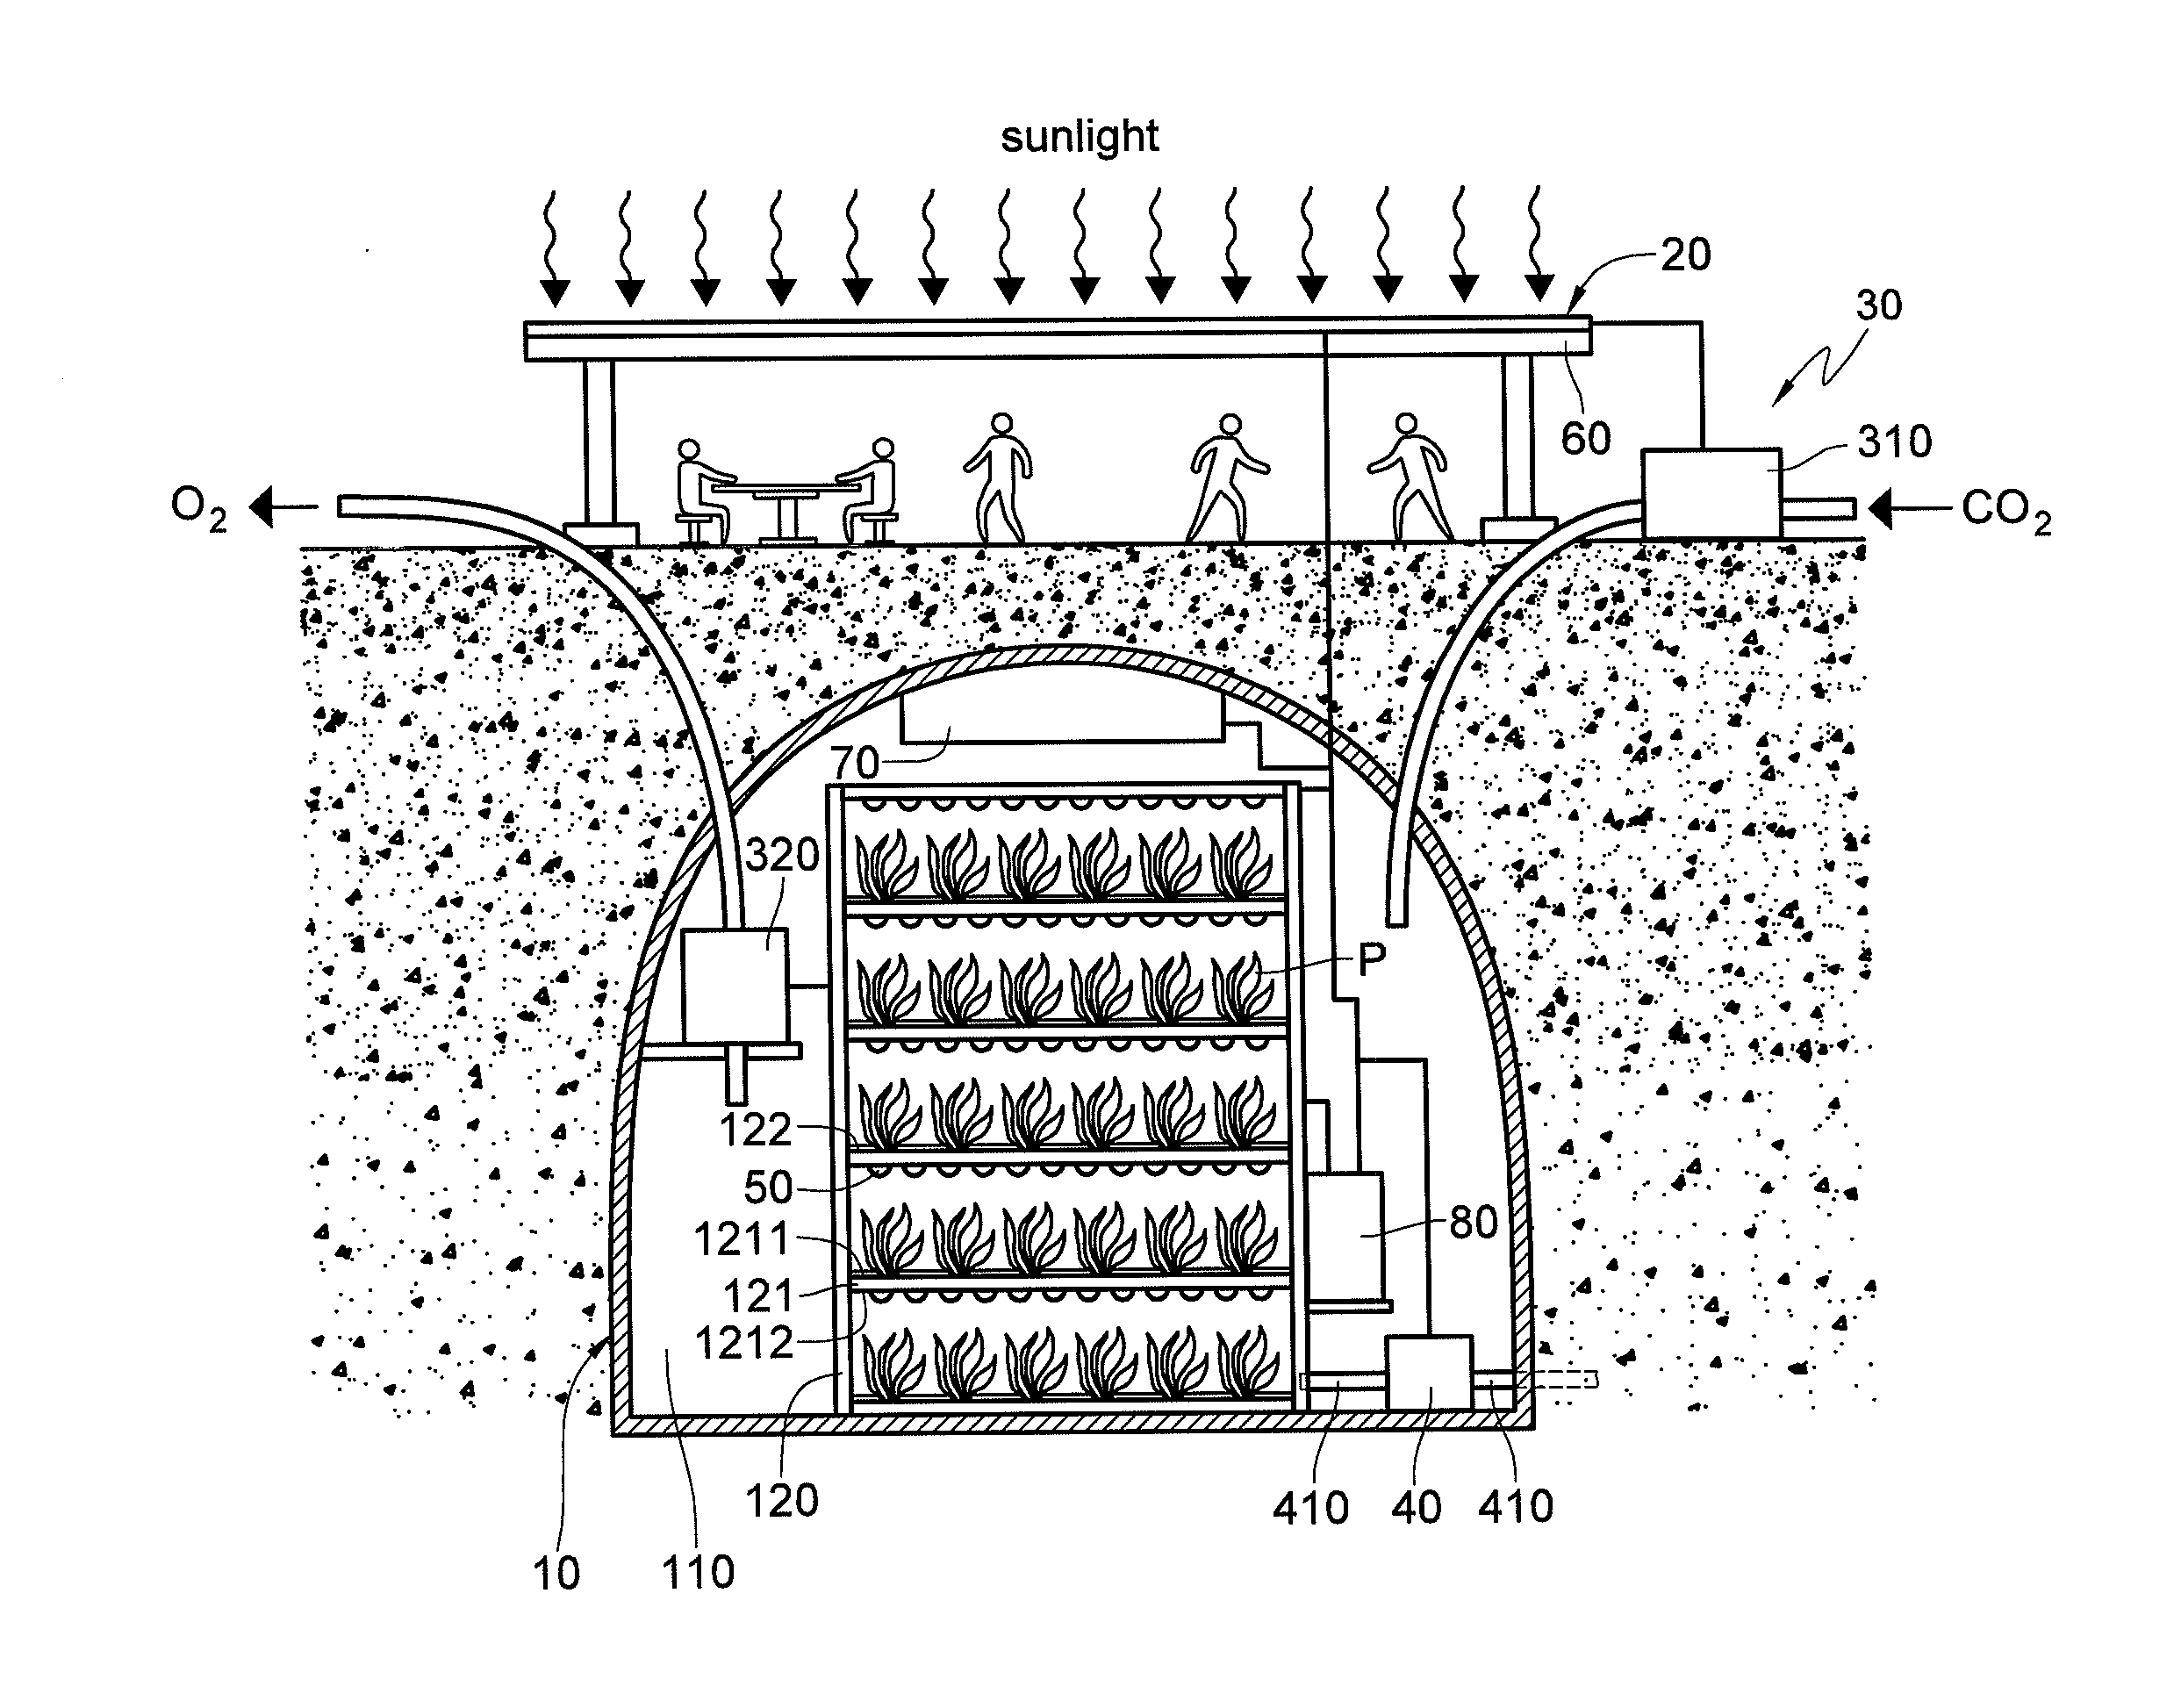 Plant-growing device with light emitting diode